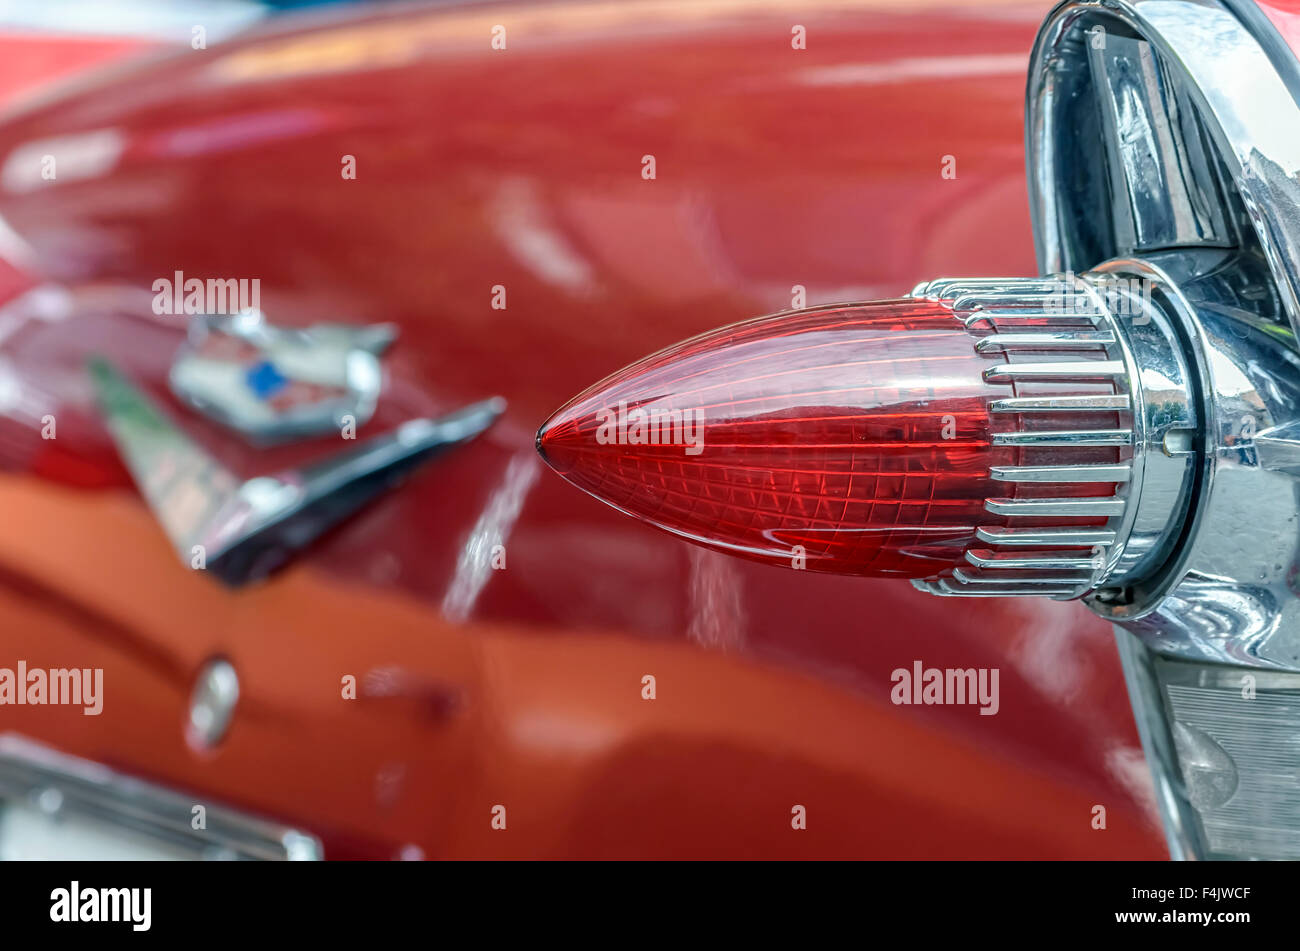 Meeting of classic american cars. Rear headlight of Chevrolet Bel Air, of 1957. Stock Photo